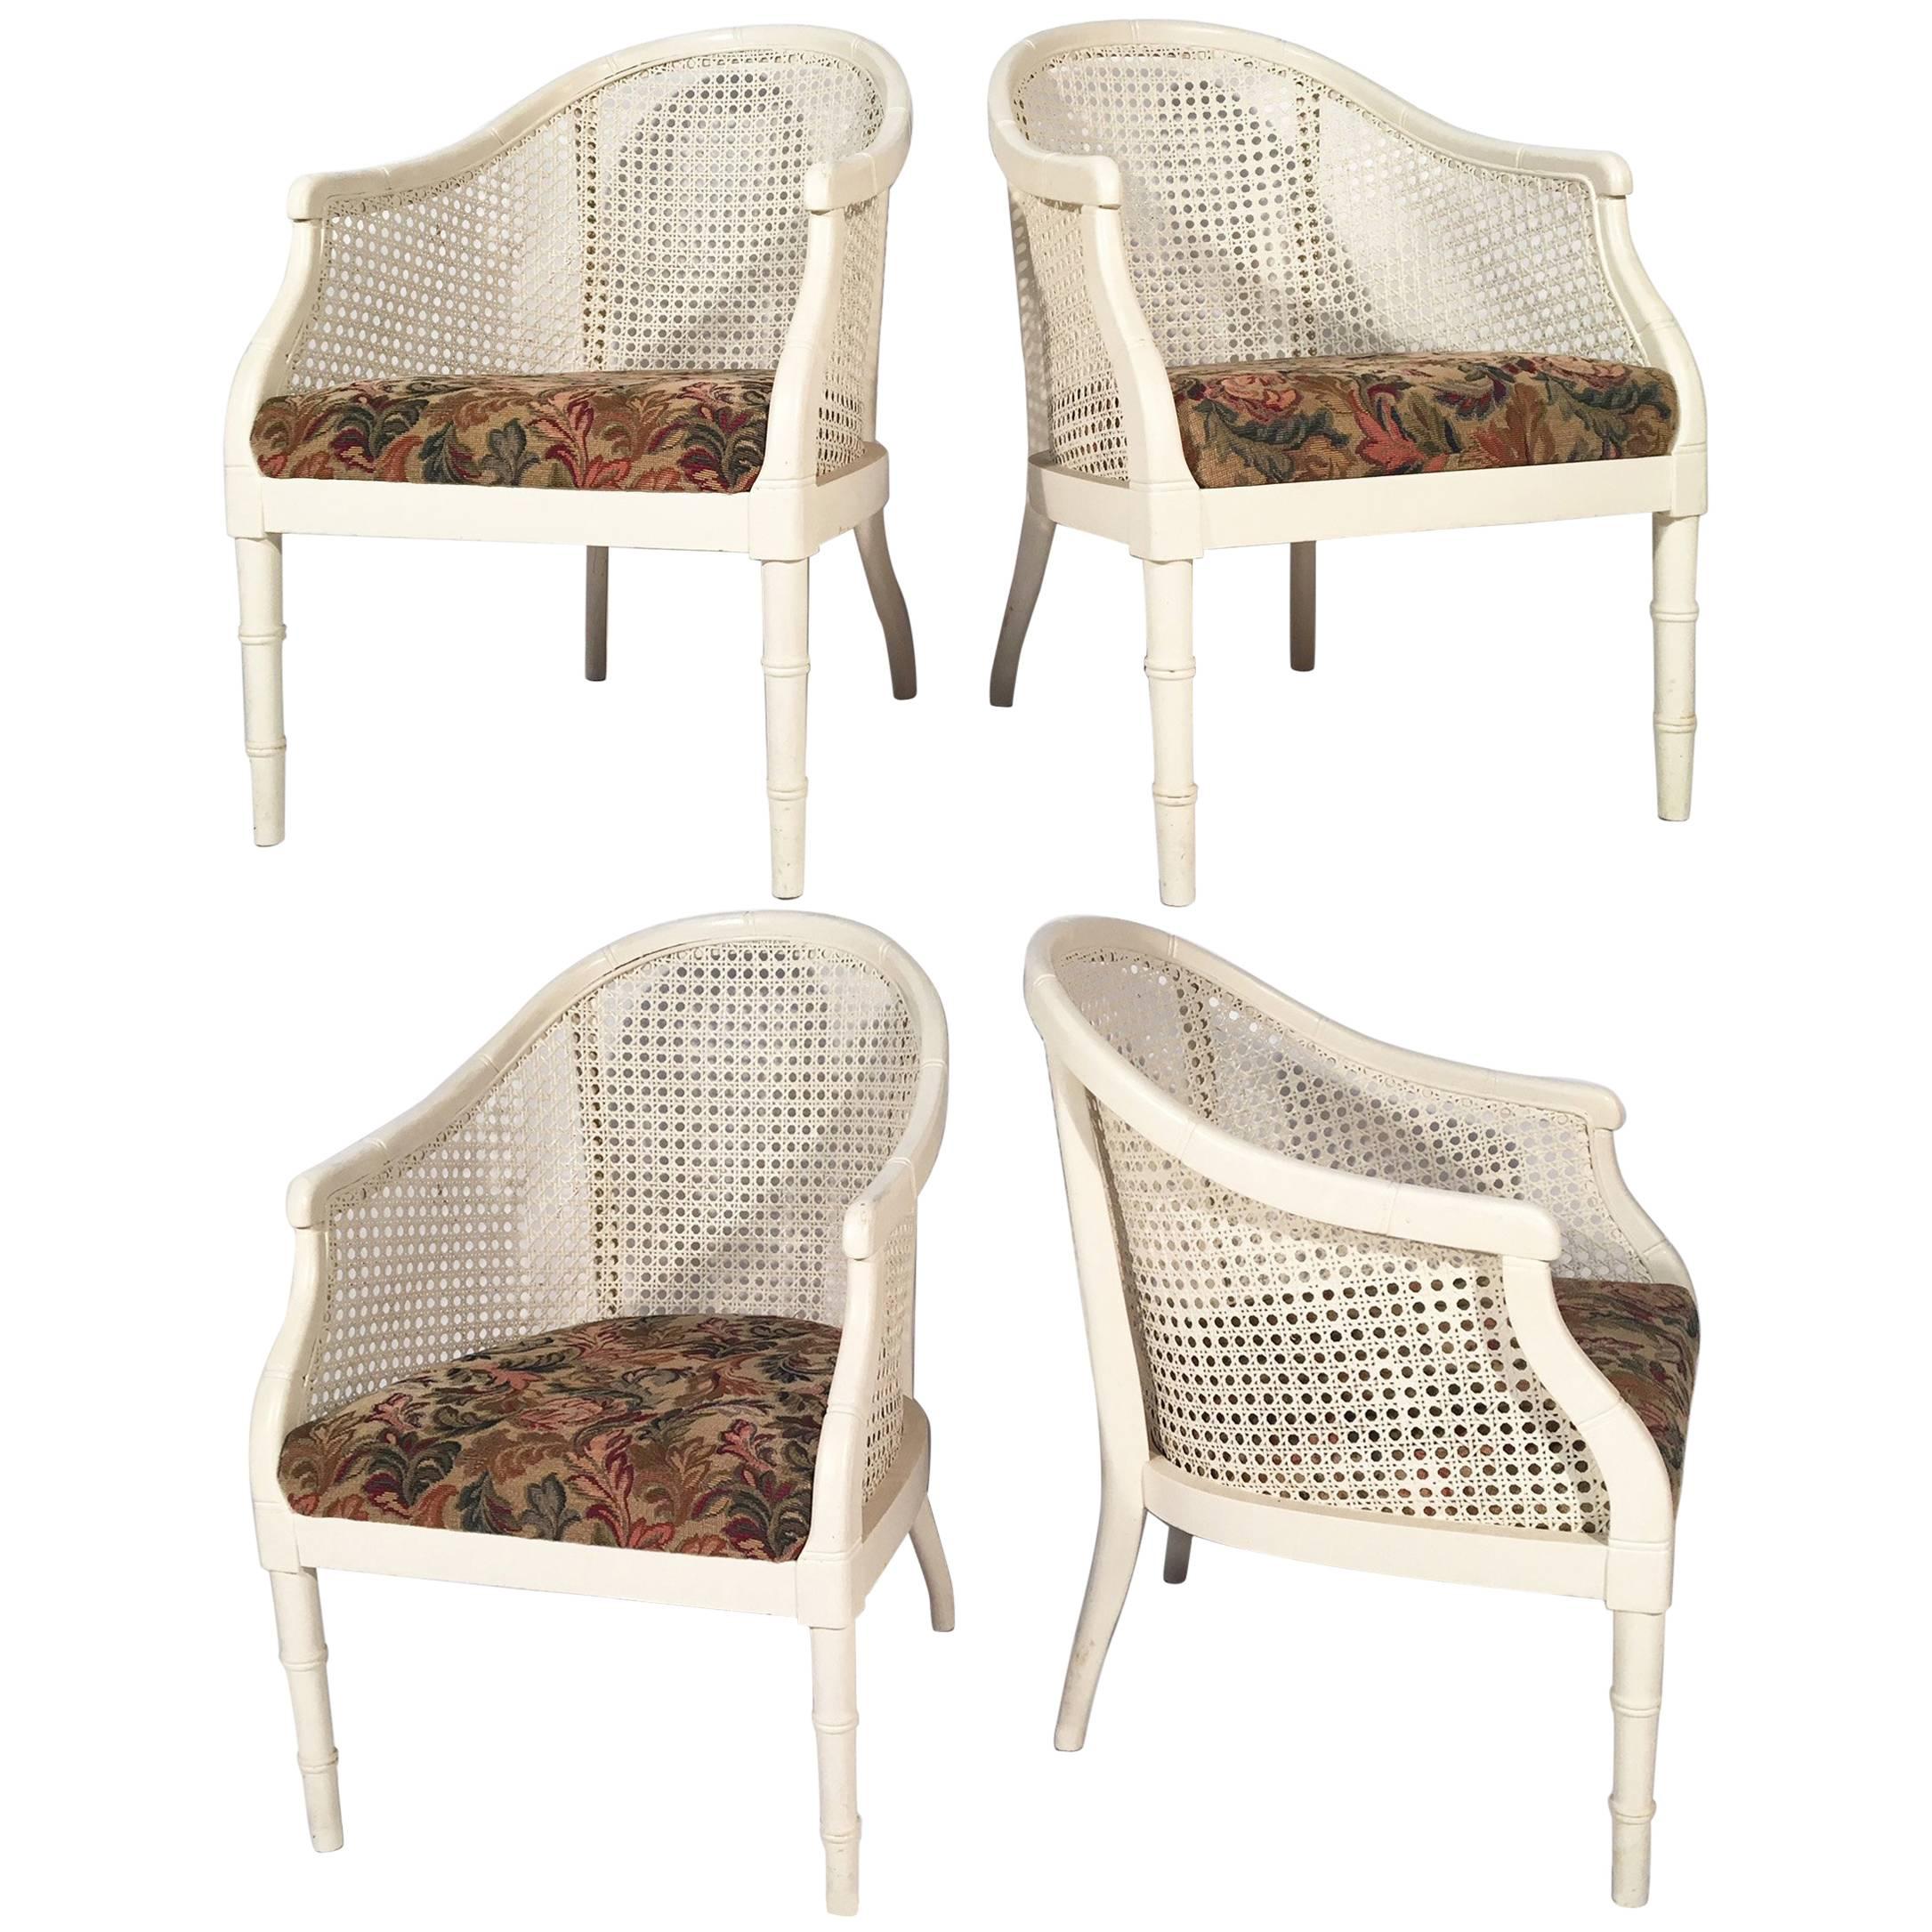 Midcentury Cane Back Barrel Chairs, Set of Four